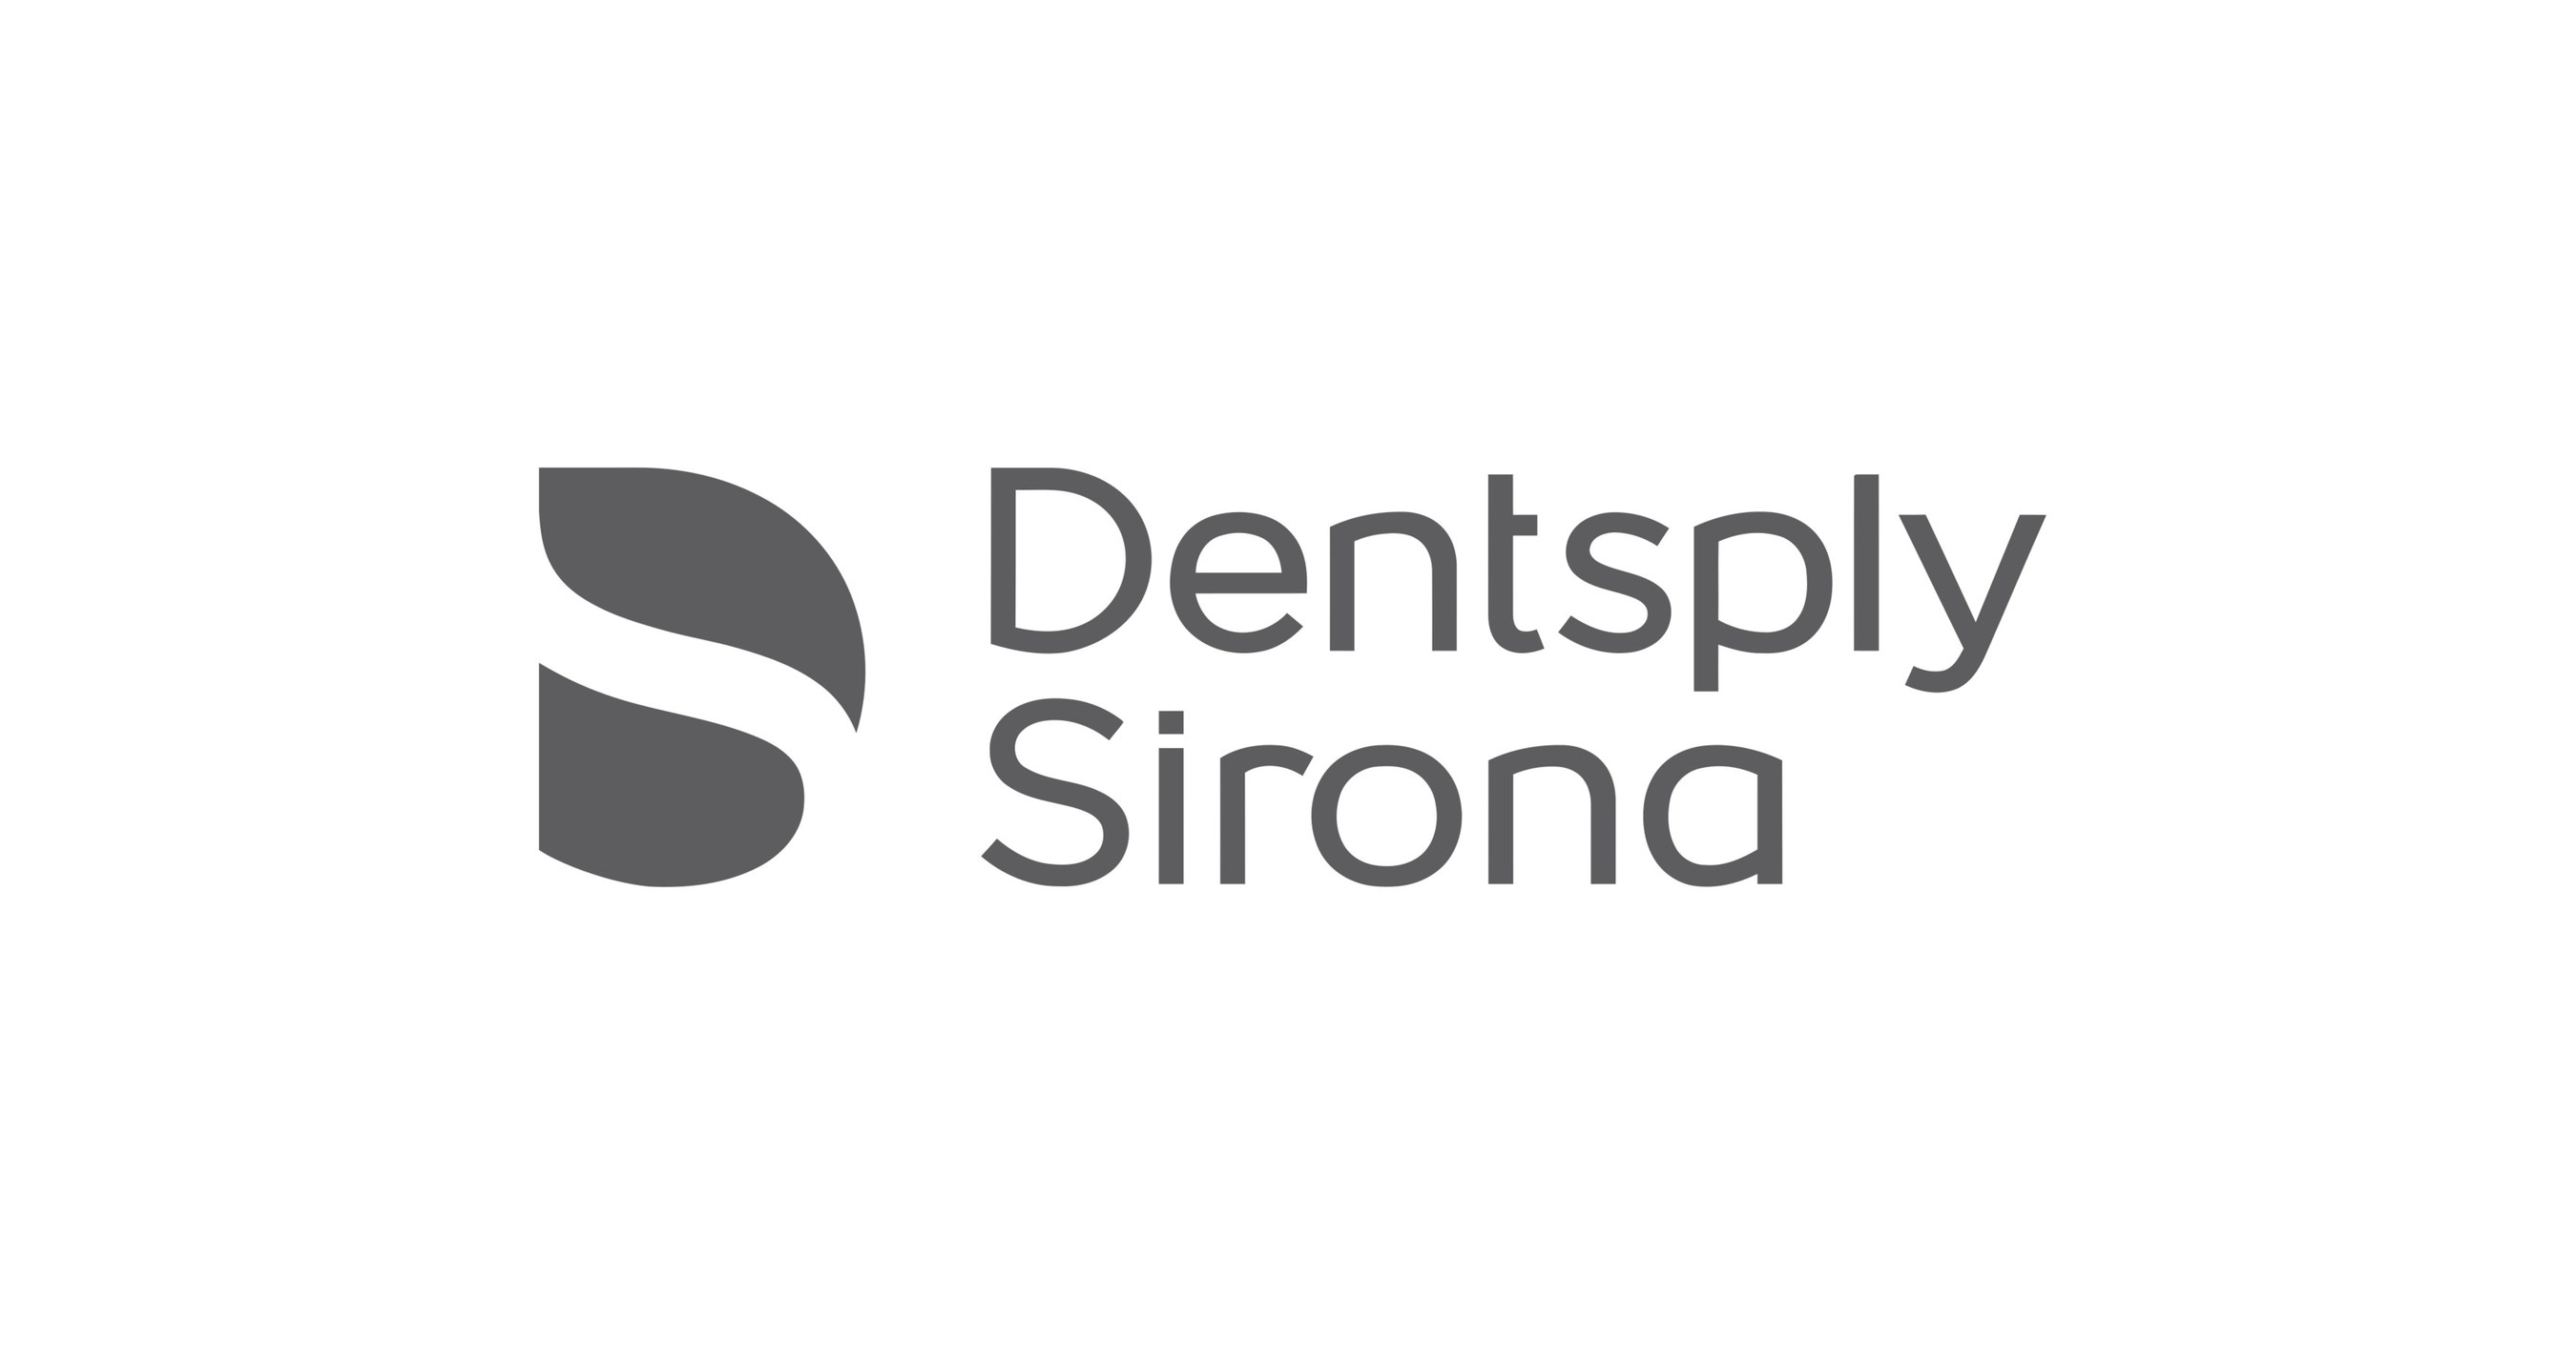 introducing-axeos-and-schick-ae-dentsply-sirona-s-imaging-solution